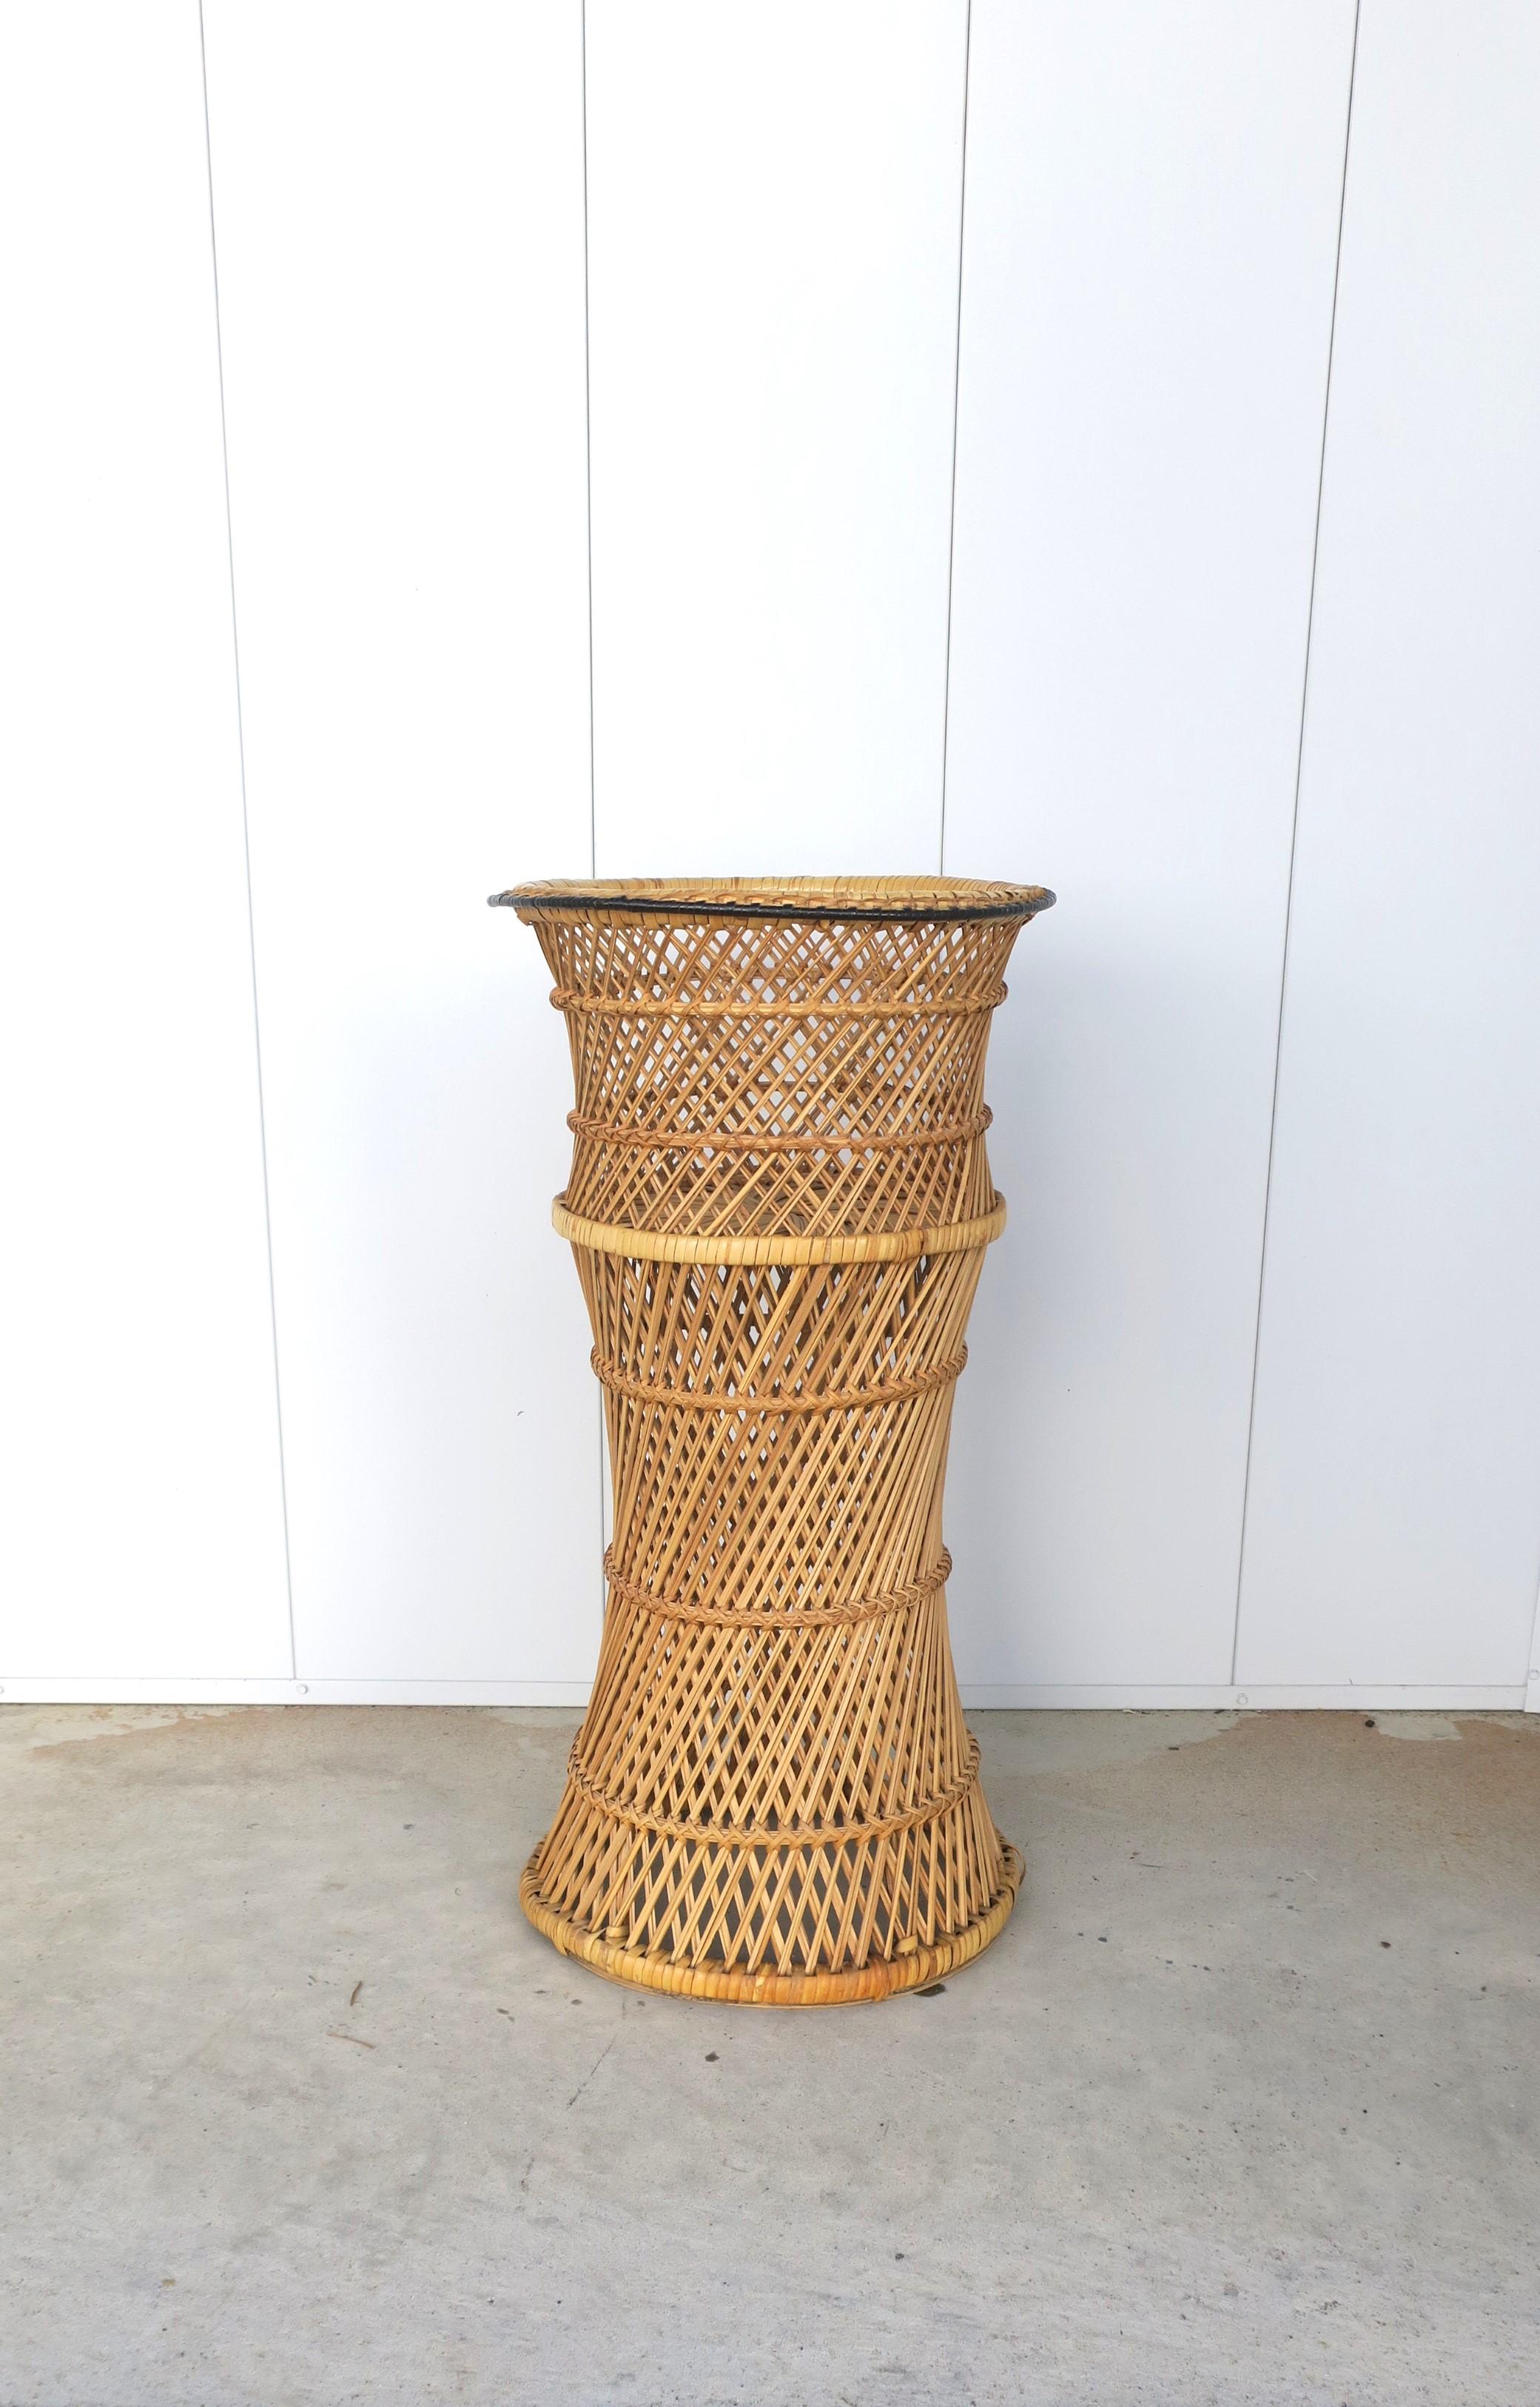 A wicker flower or plant cachepot jardiniere holder stand, circa mid to late-20th century. A great piece to elevate a flower or plant, indoors or outside covered patio. Piece is in the style of Emmanuelle Peacock. Dimensions include the following: